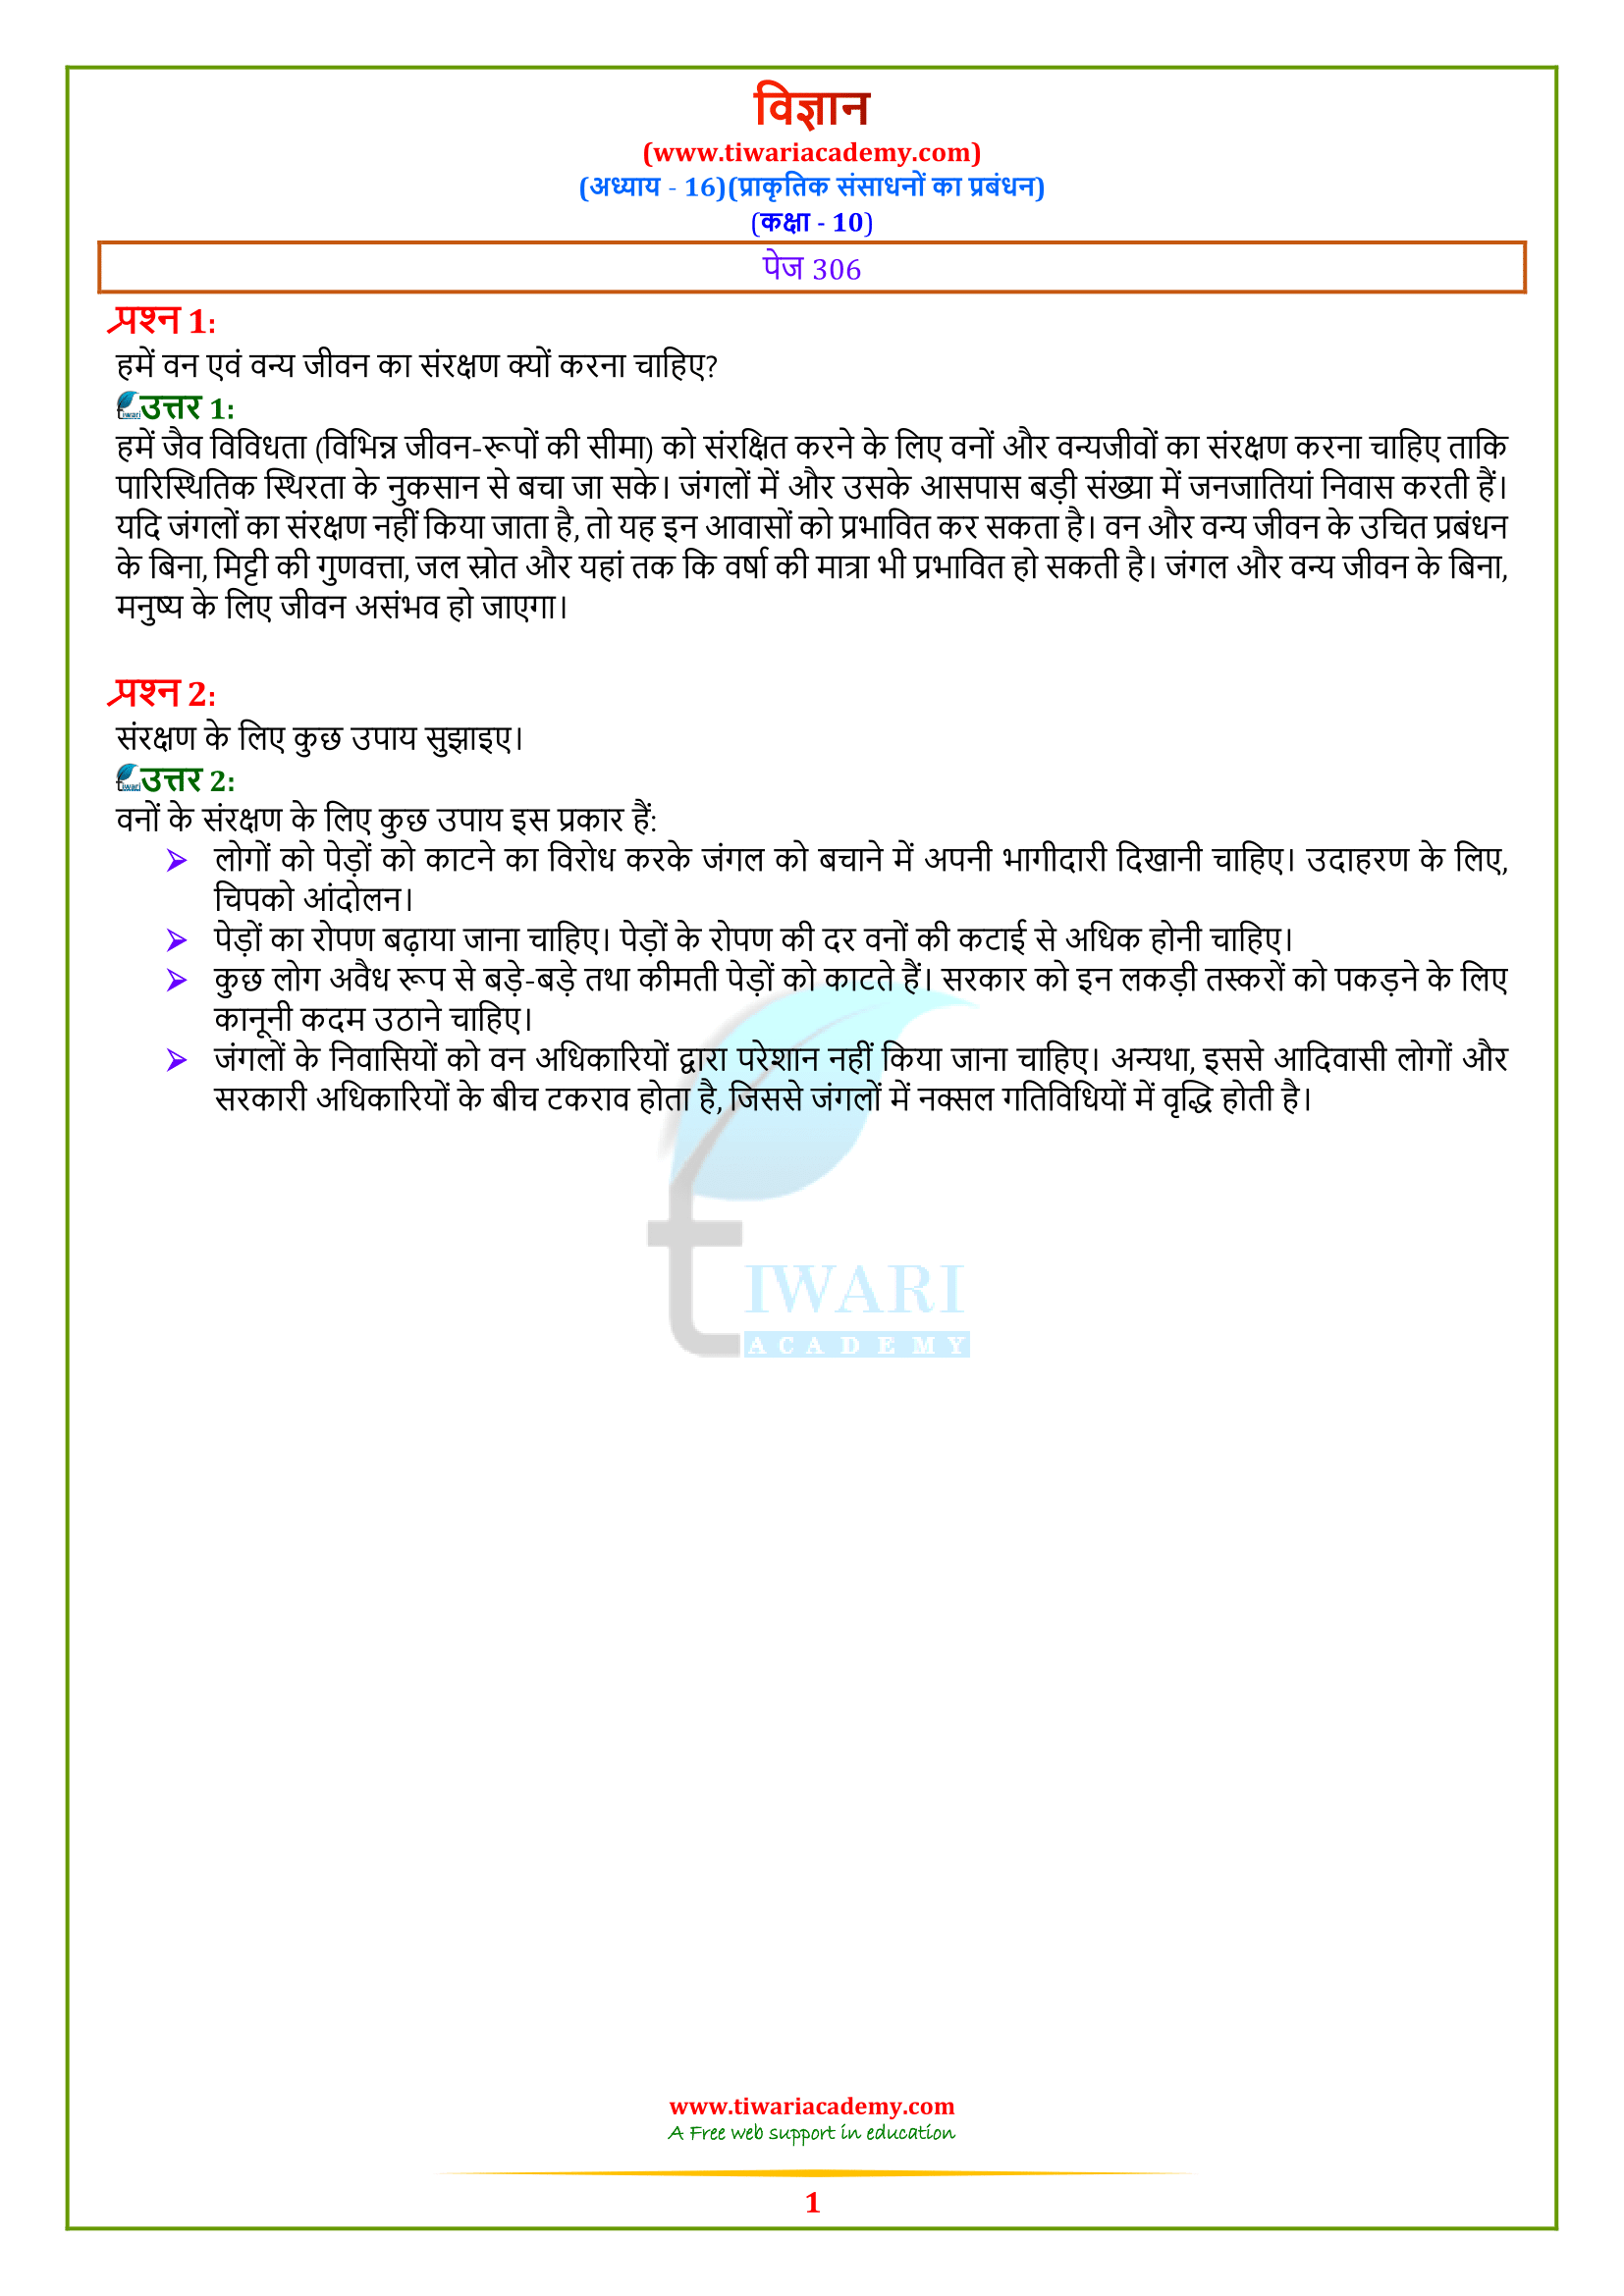 NCERT Solutions for Class 10 Science Chapter 16 page 306 in Hindi